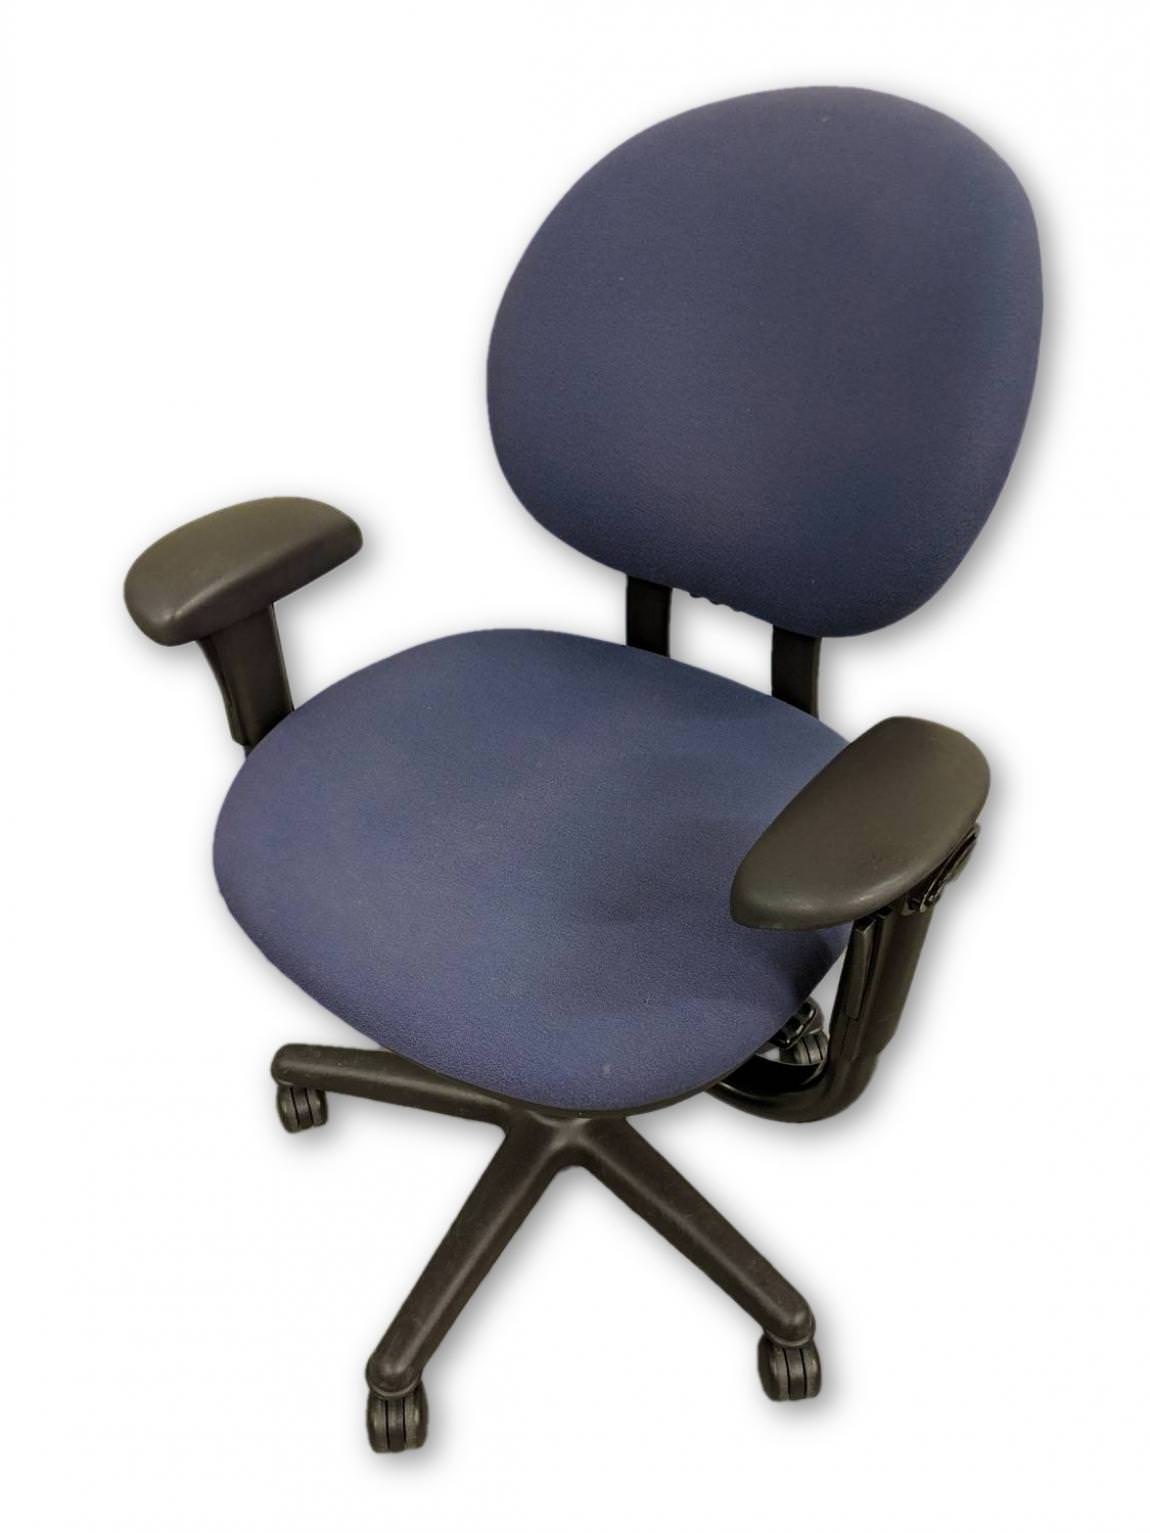 Steelcase Blue Rolling Office Chairs